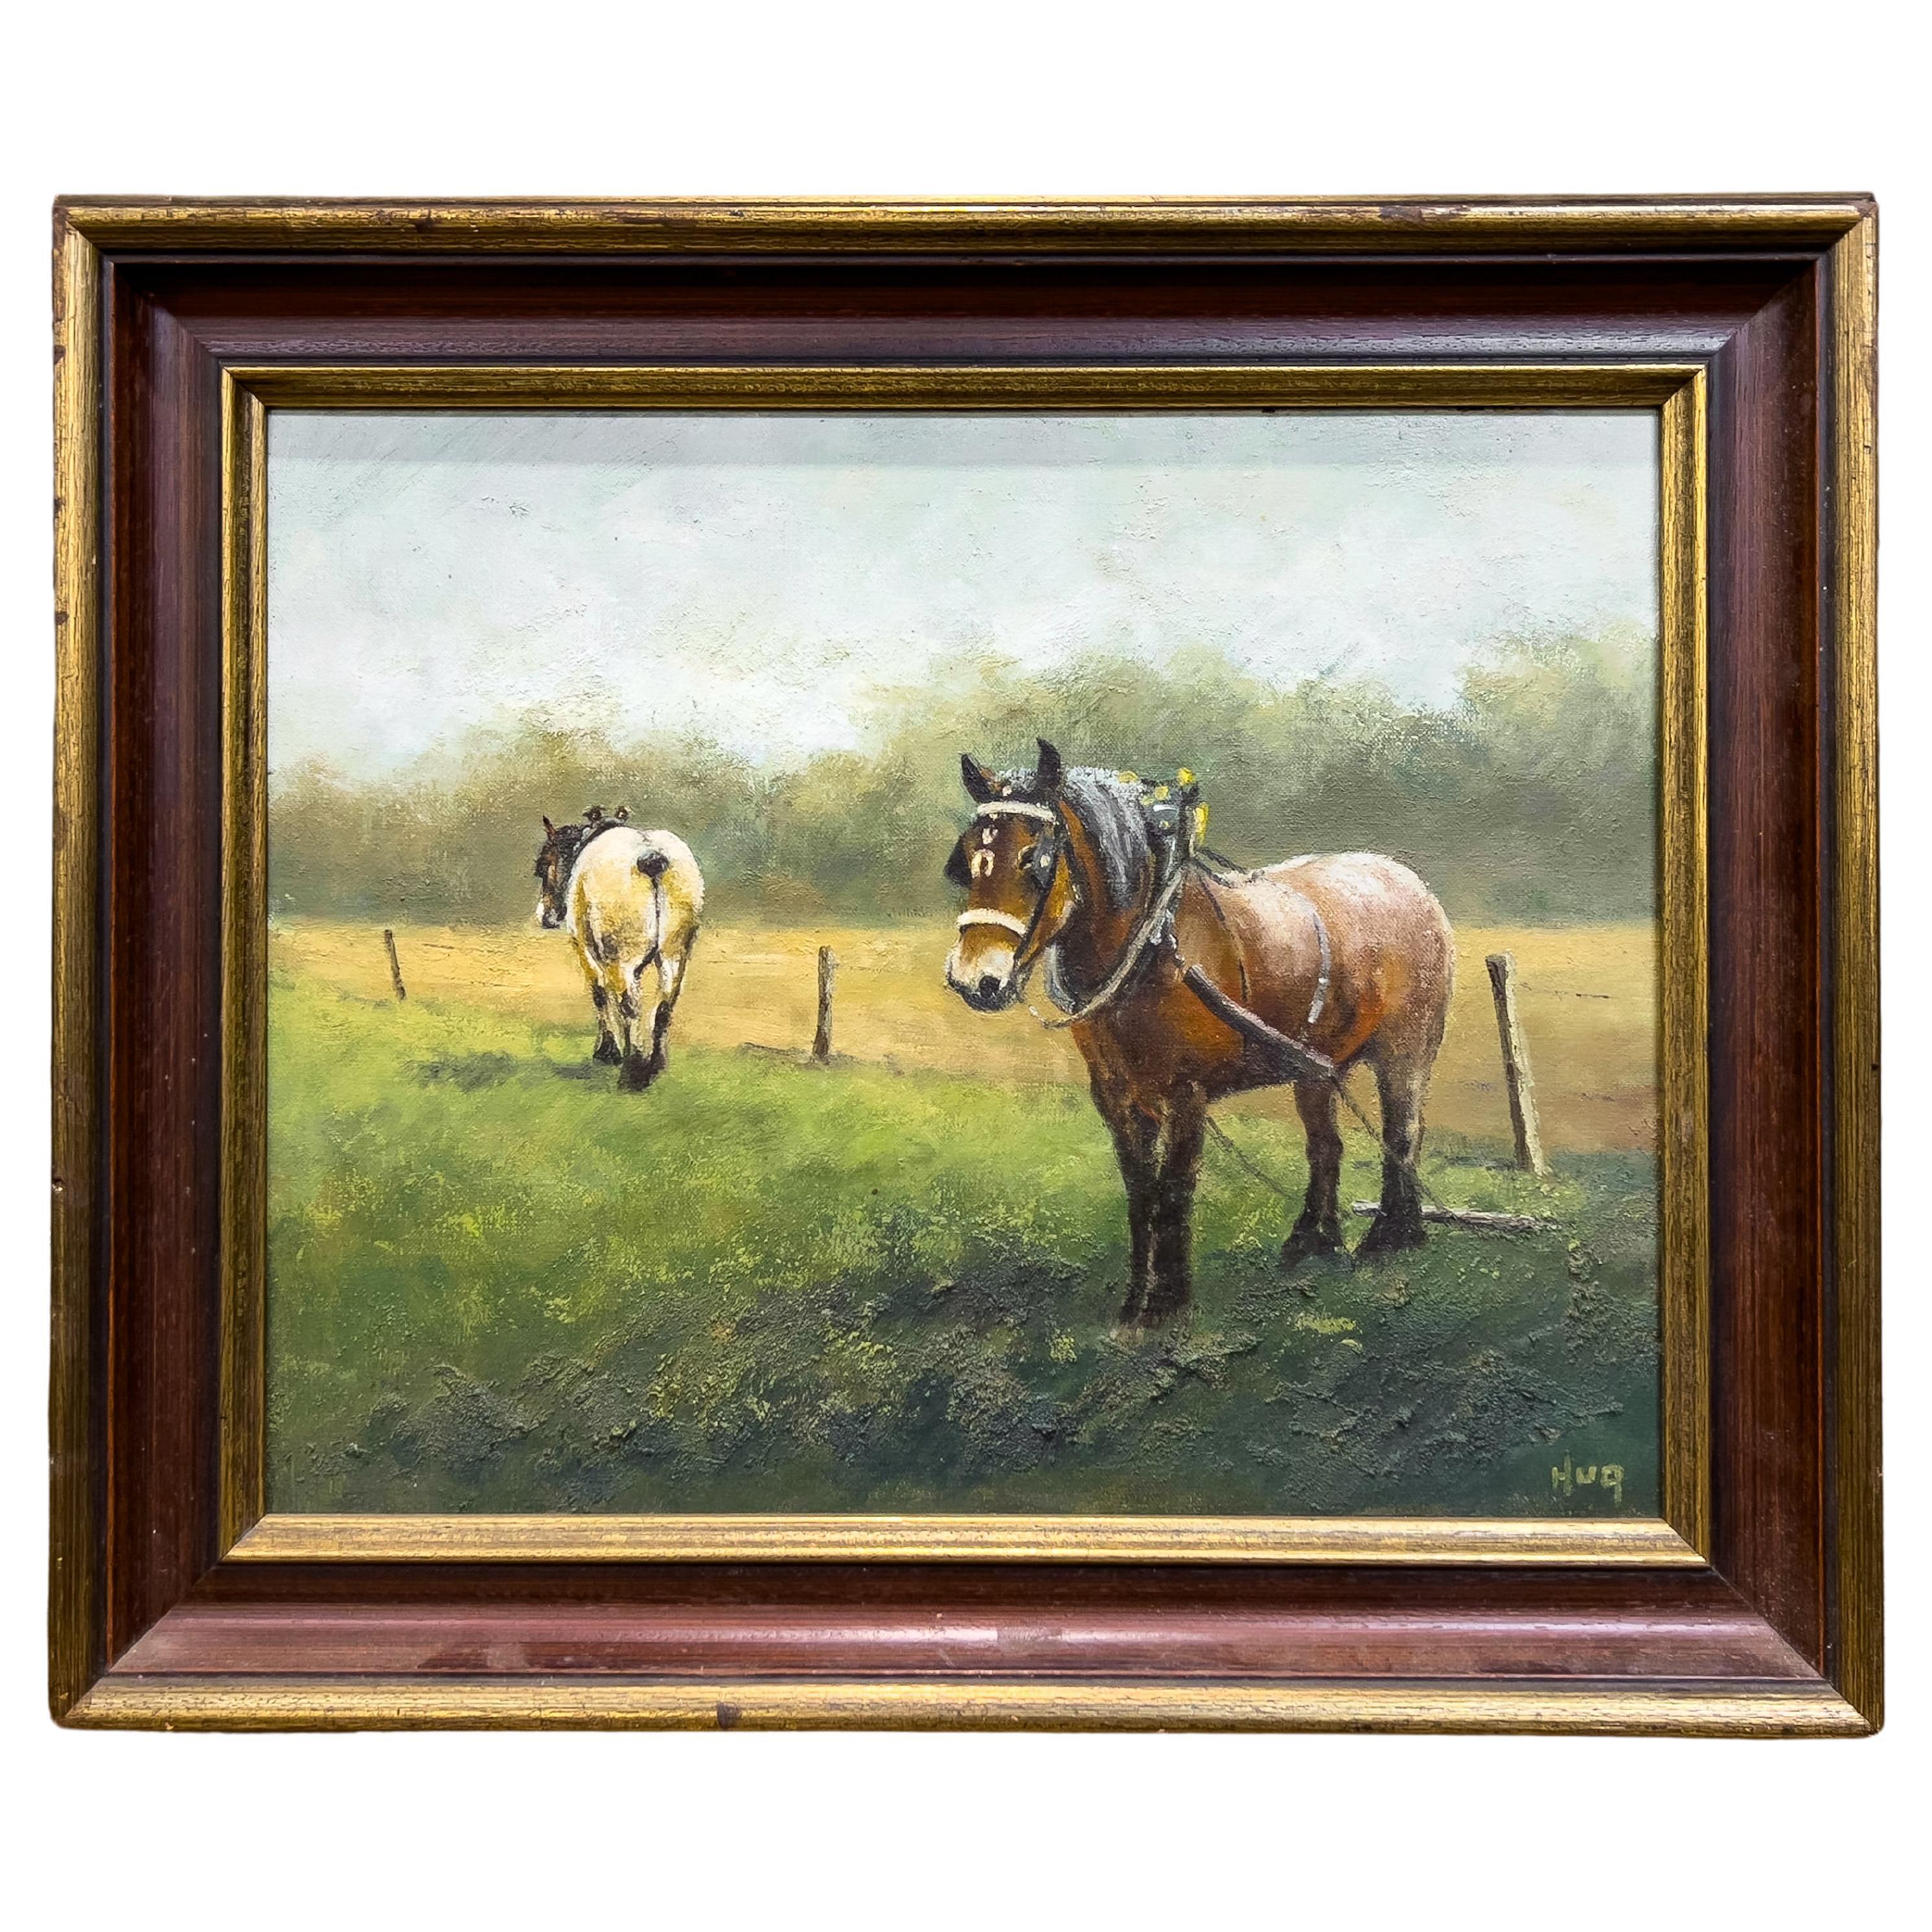 "The Mules" Oil on Canvas Painting